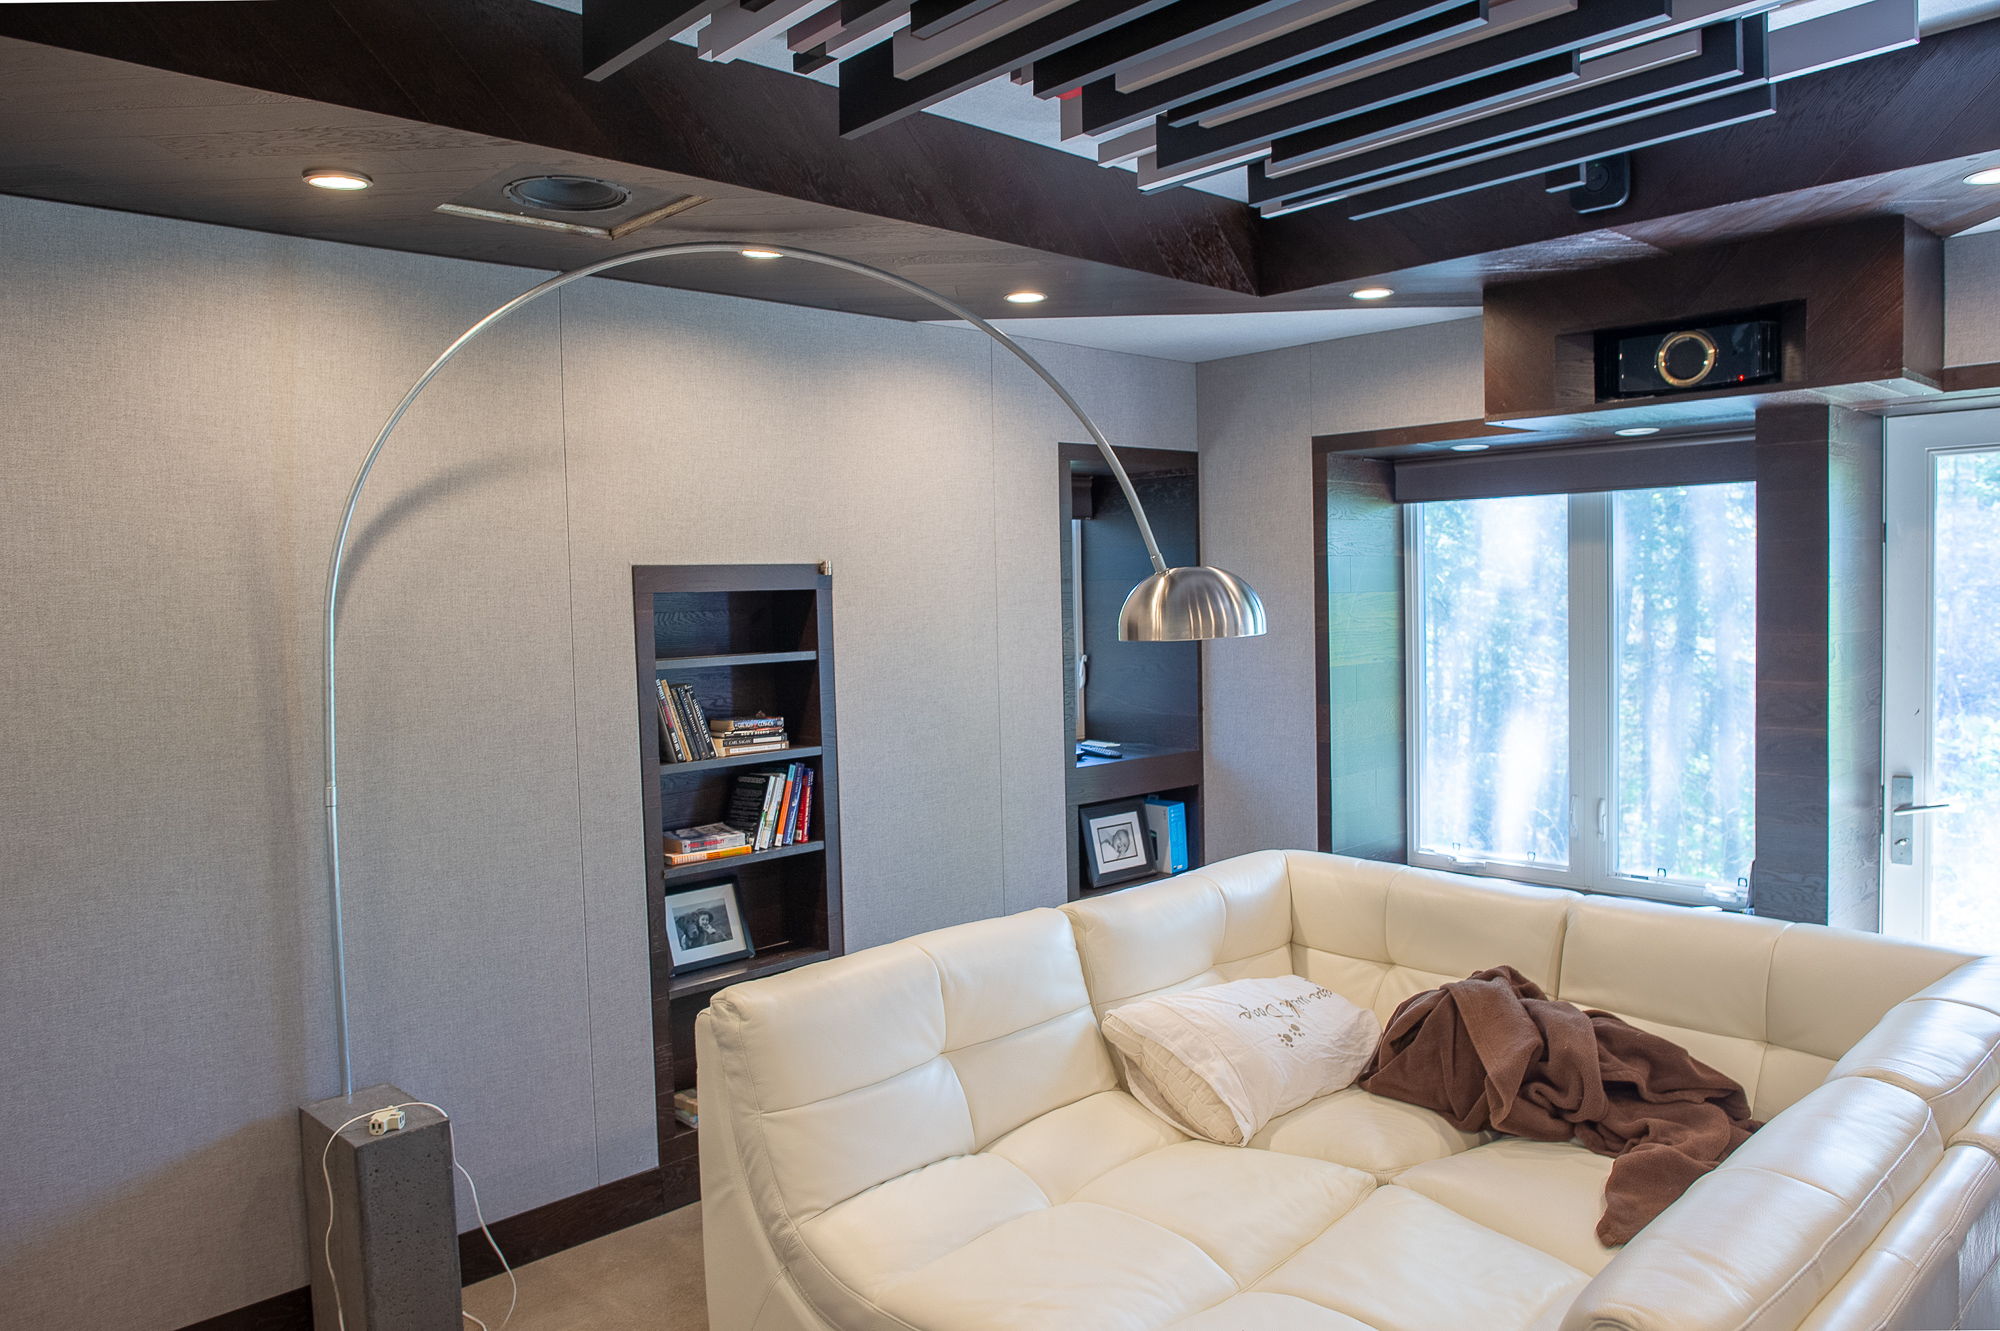 Fabricmate walls hide the acoustic treatment